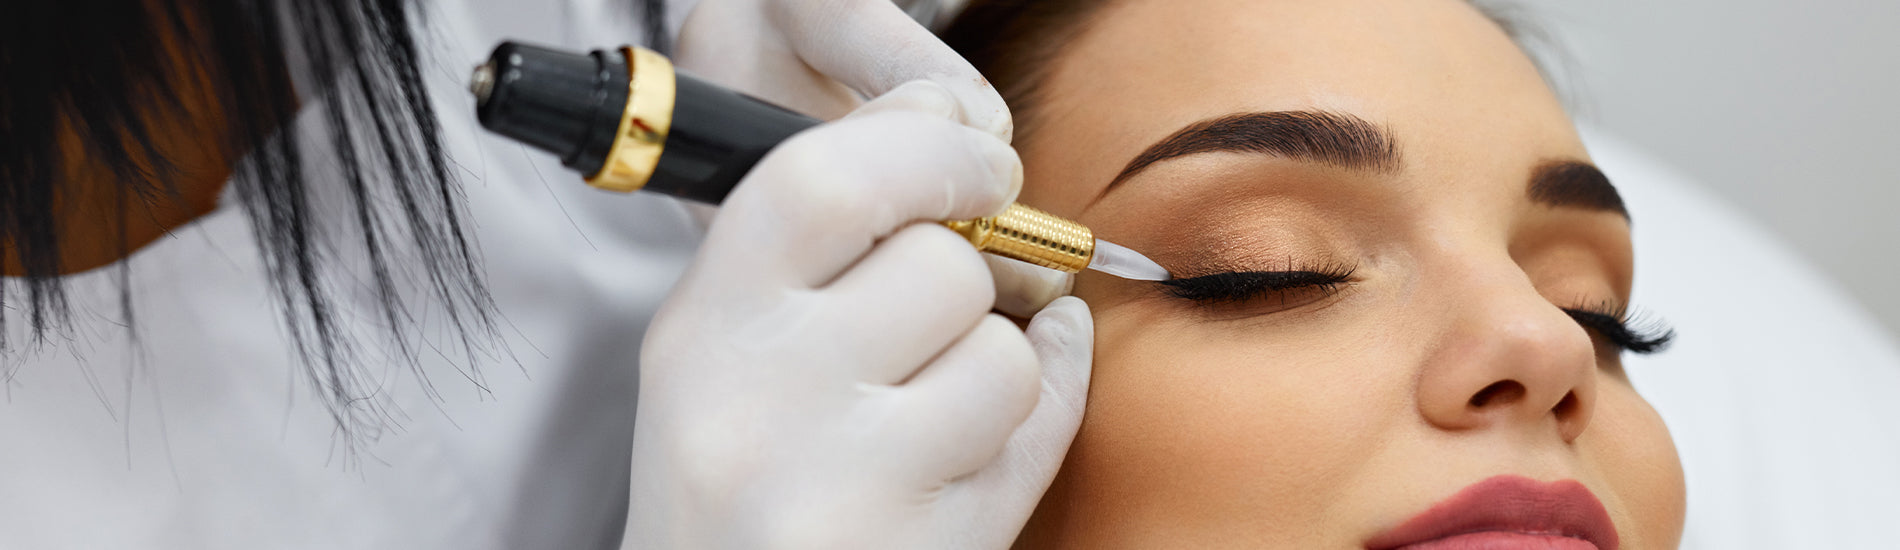 Are Numbing Creams and Topical Anesthetics Safe for All Skin Types in Permanent Makeup?